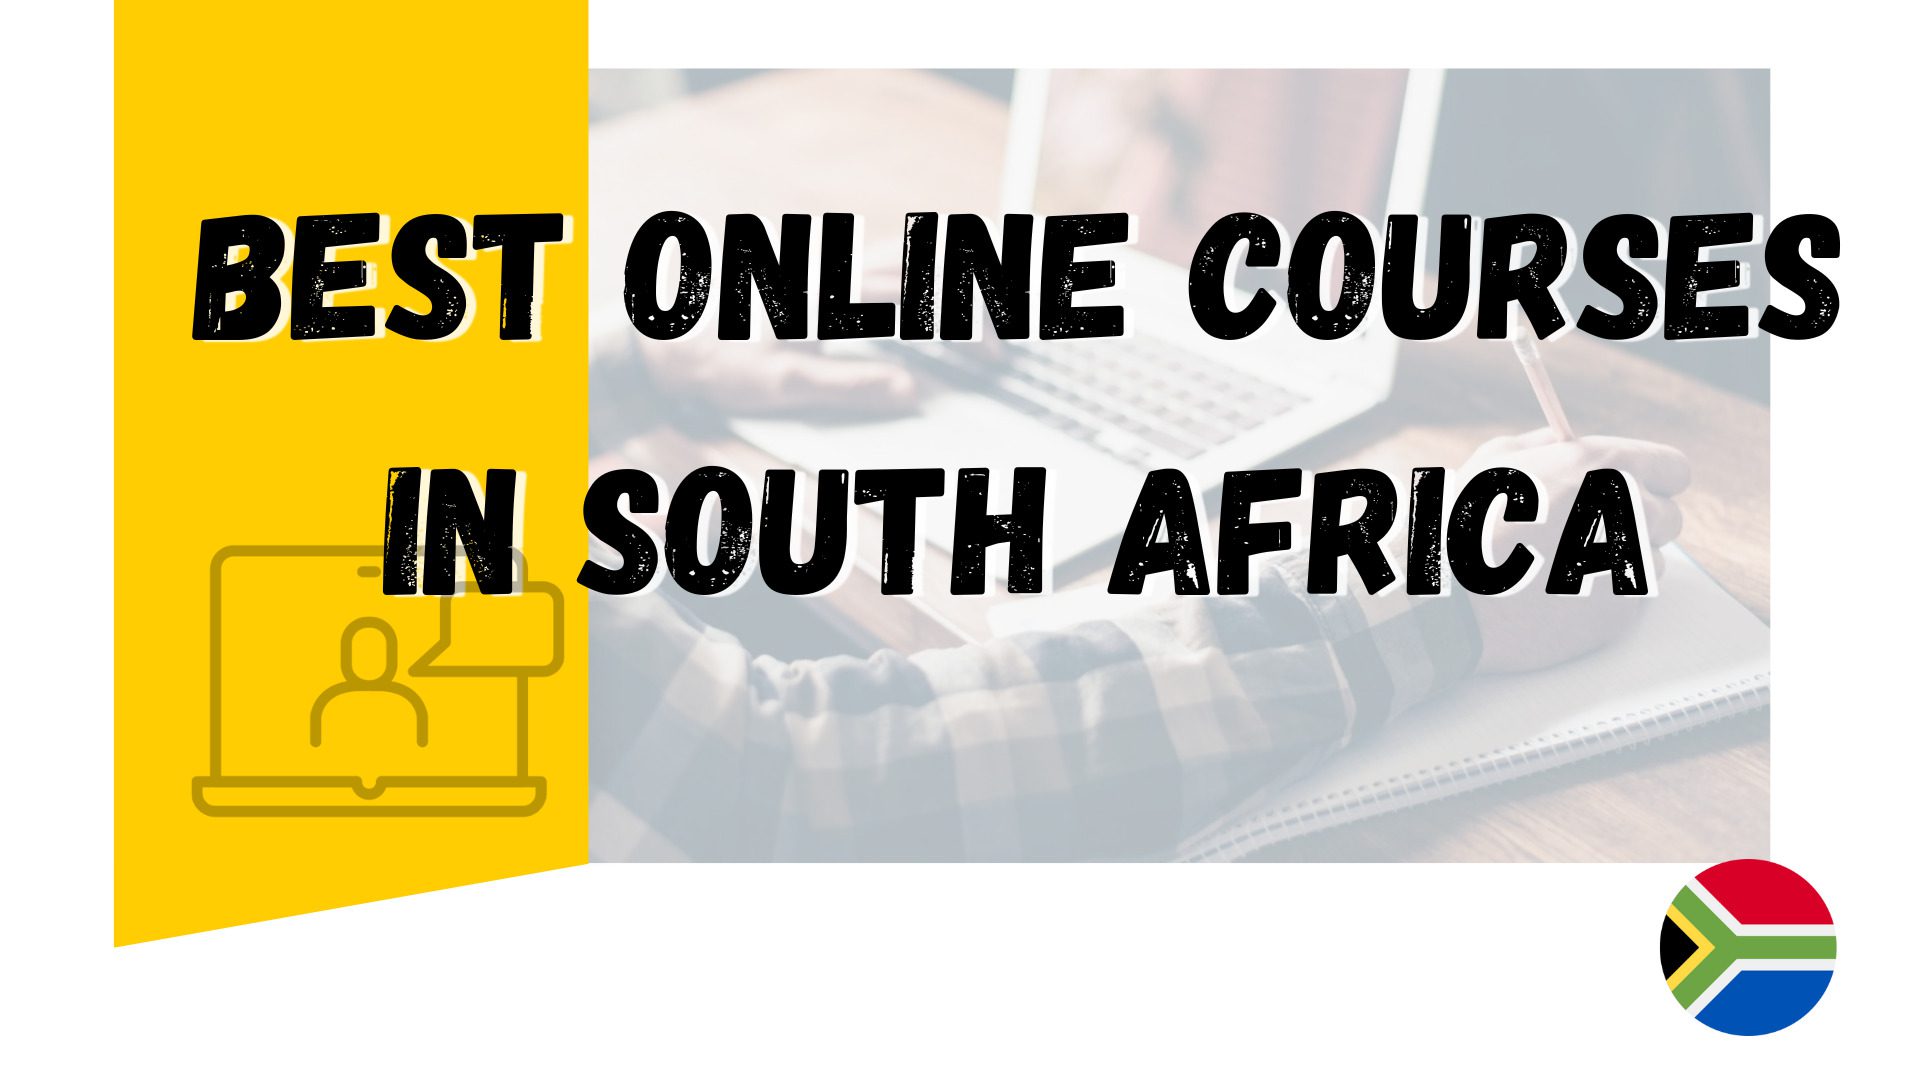 Best Online Courses in South Africa